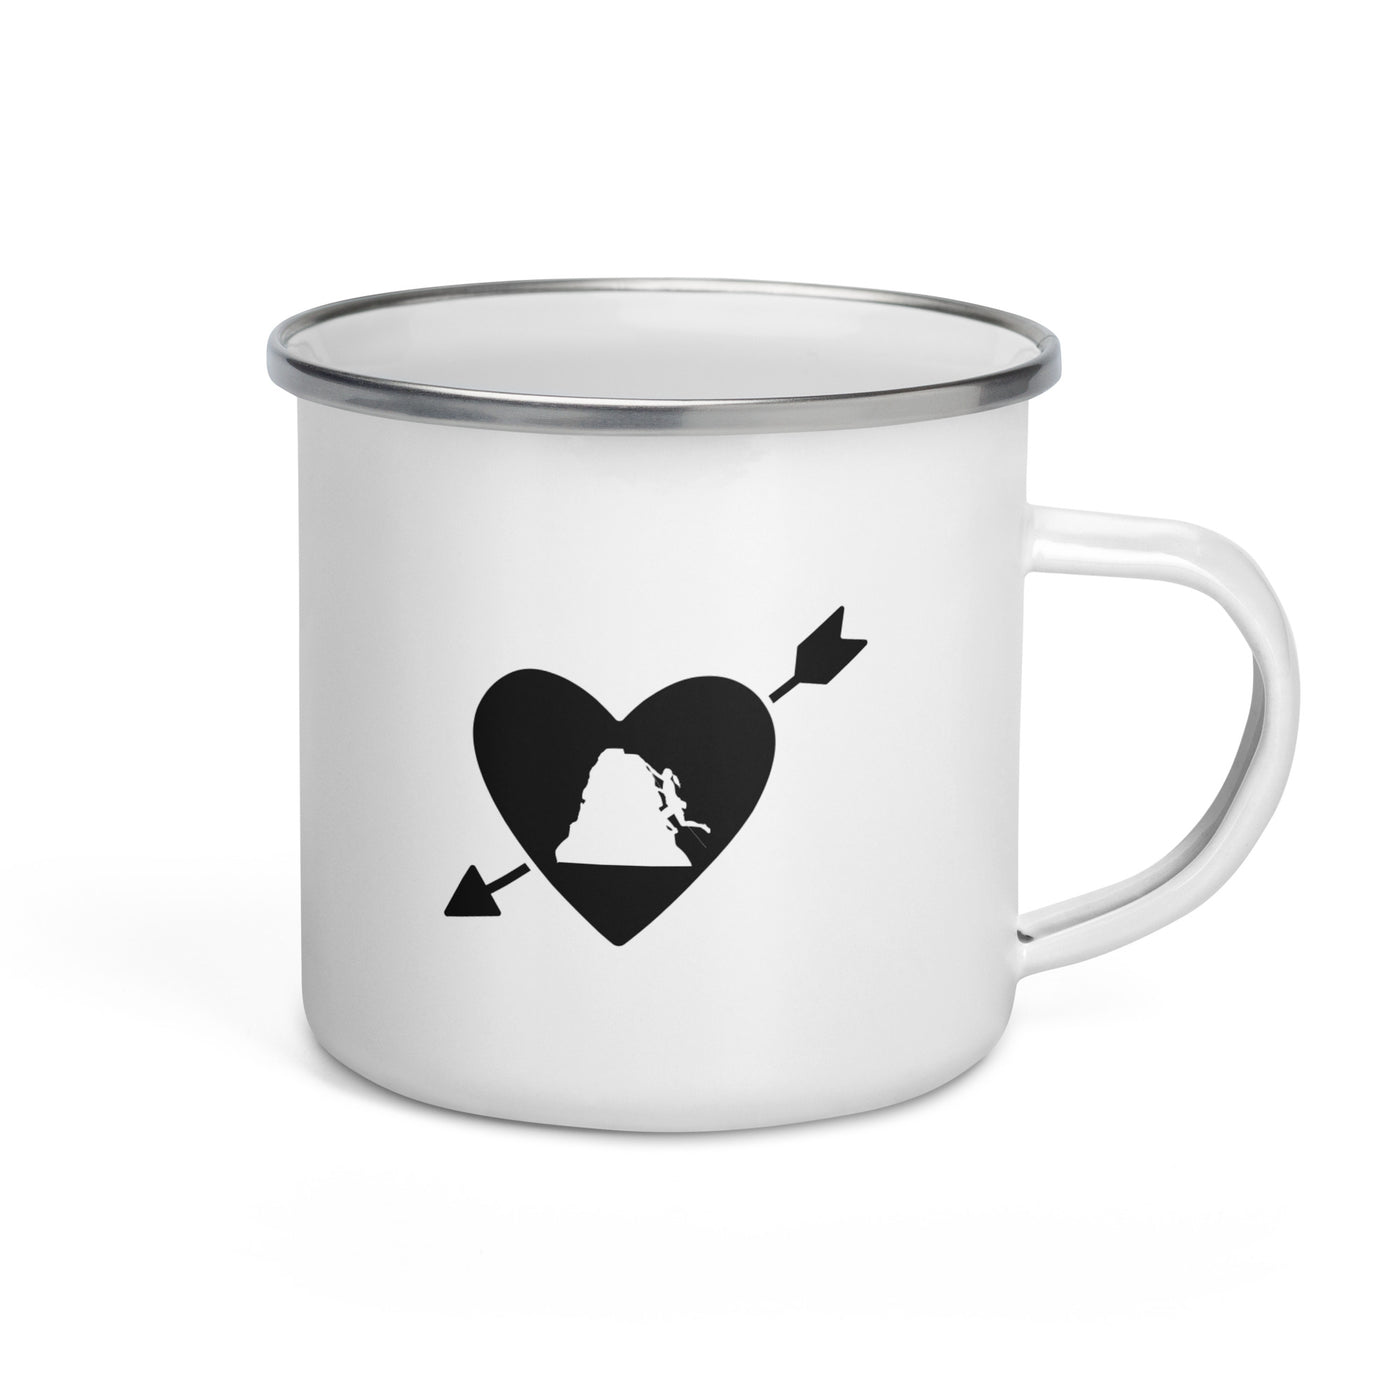 Arrow Heart And Climbing 1 - Emaille Tasse klettern Default Title